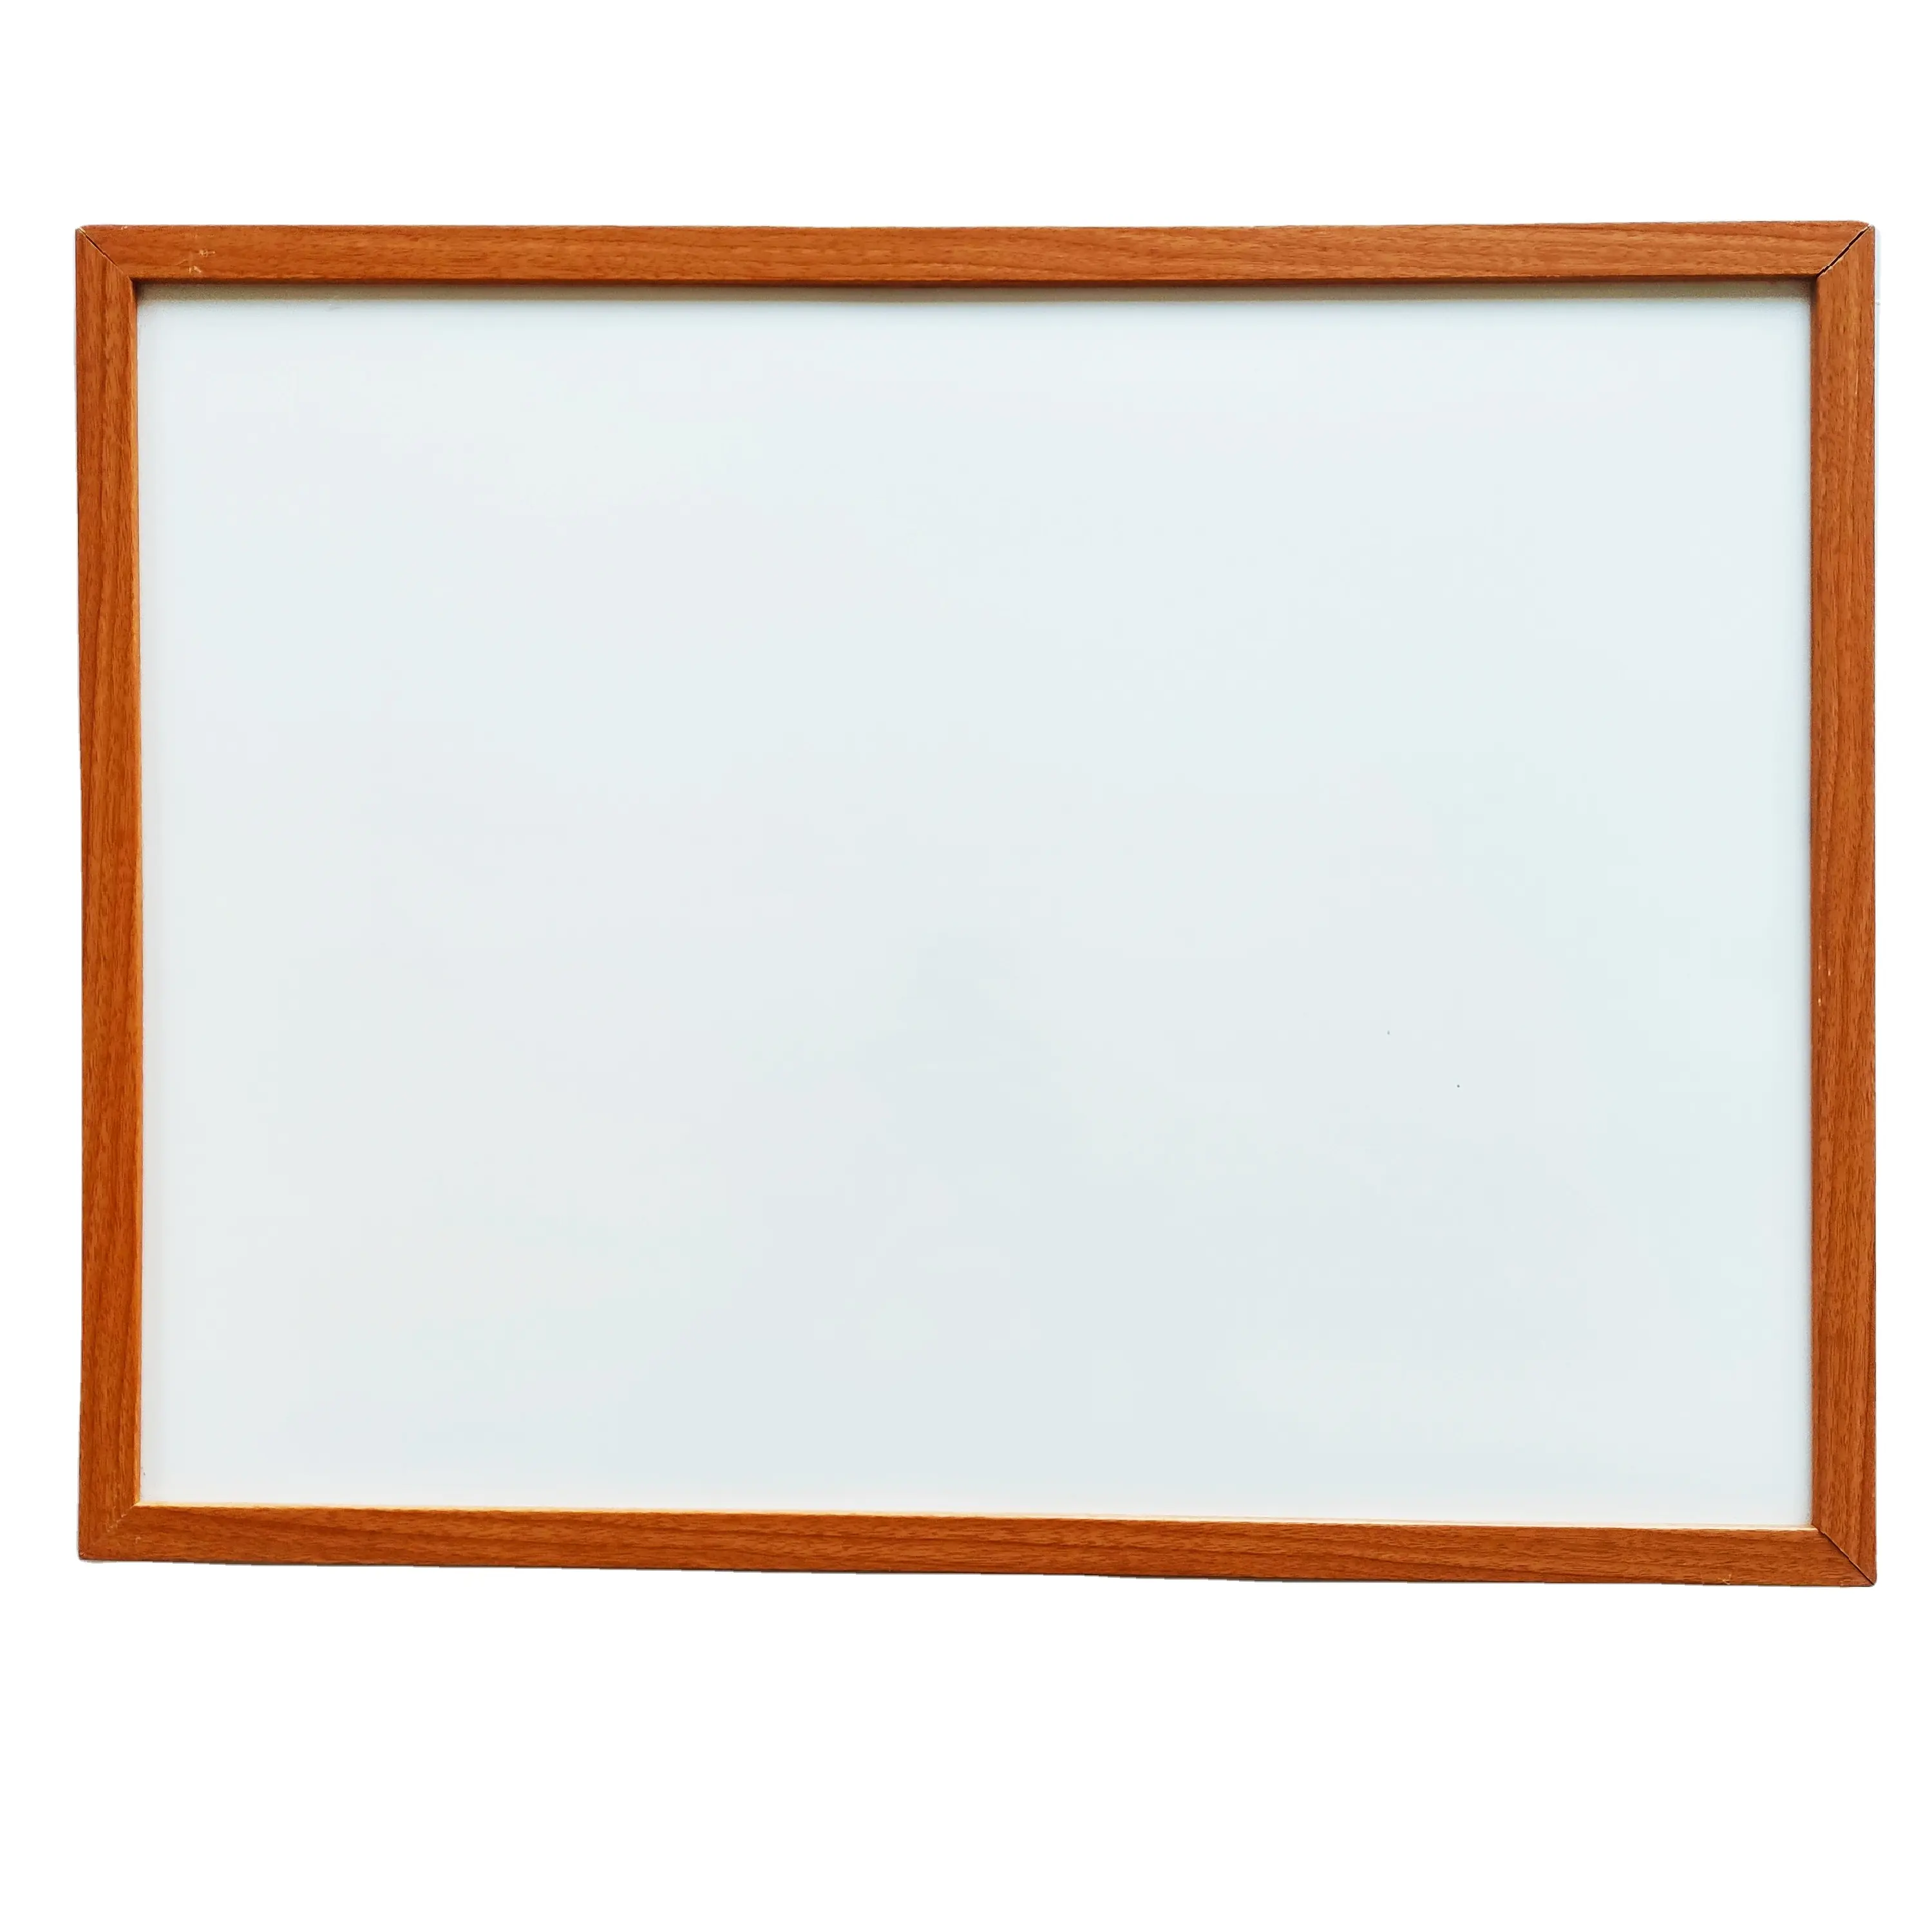 60*45cm factory price wooden frame magnetic whiteboard with two markers, a marker and an eraser